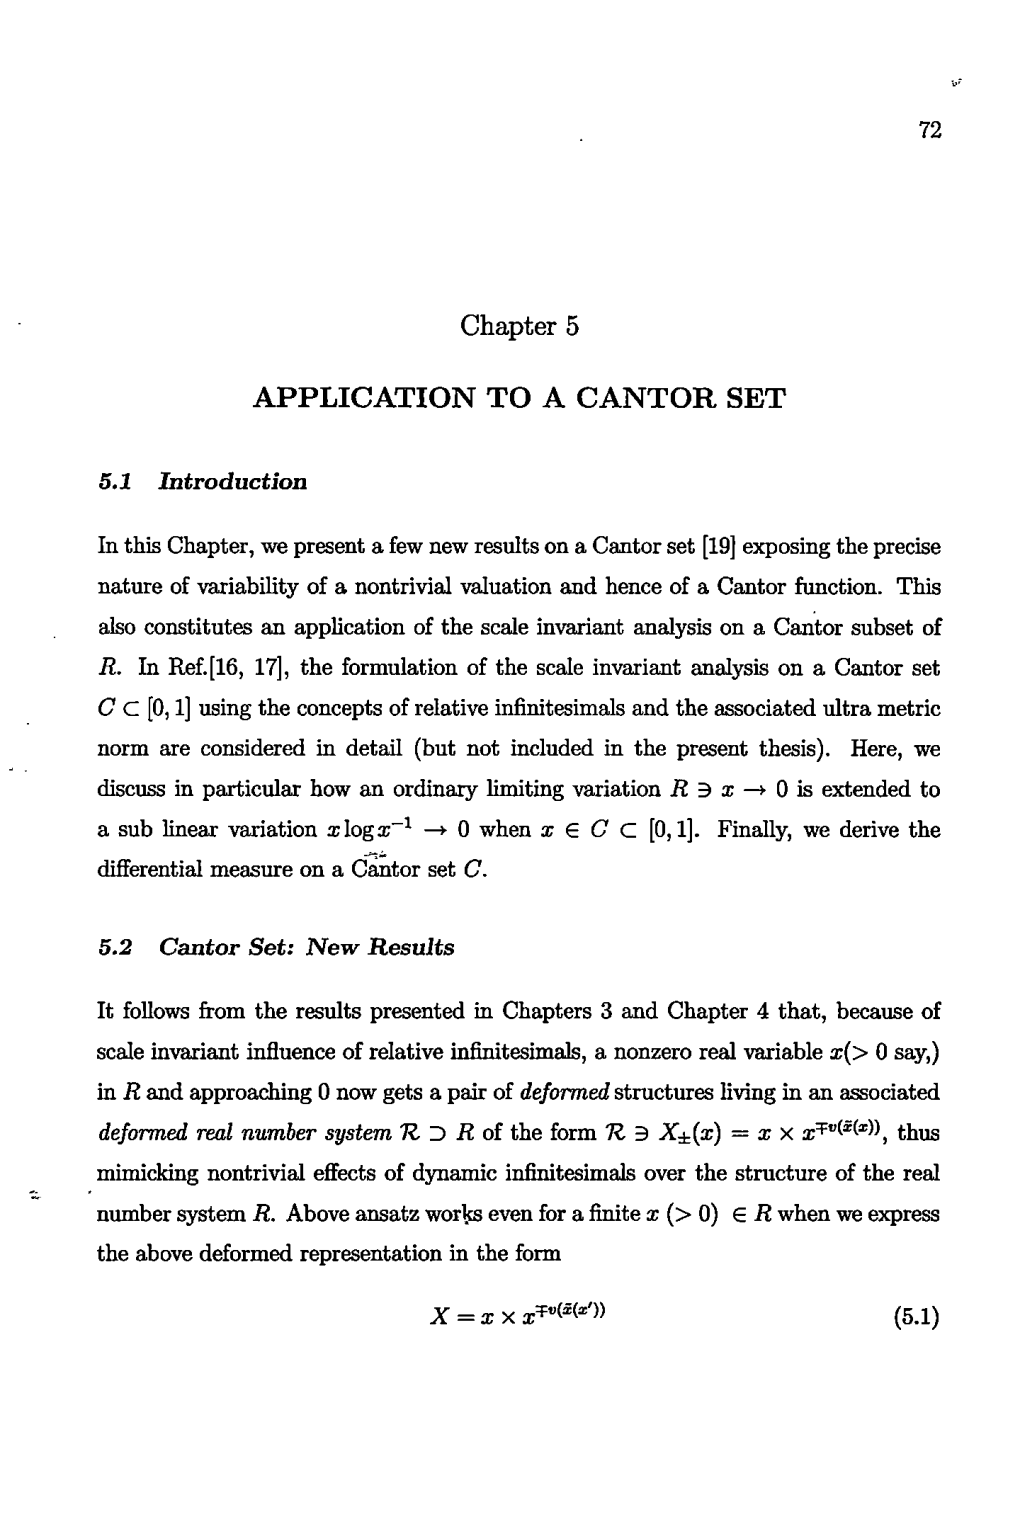 Application to a Cantor Set